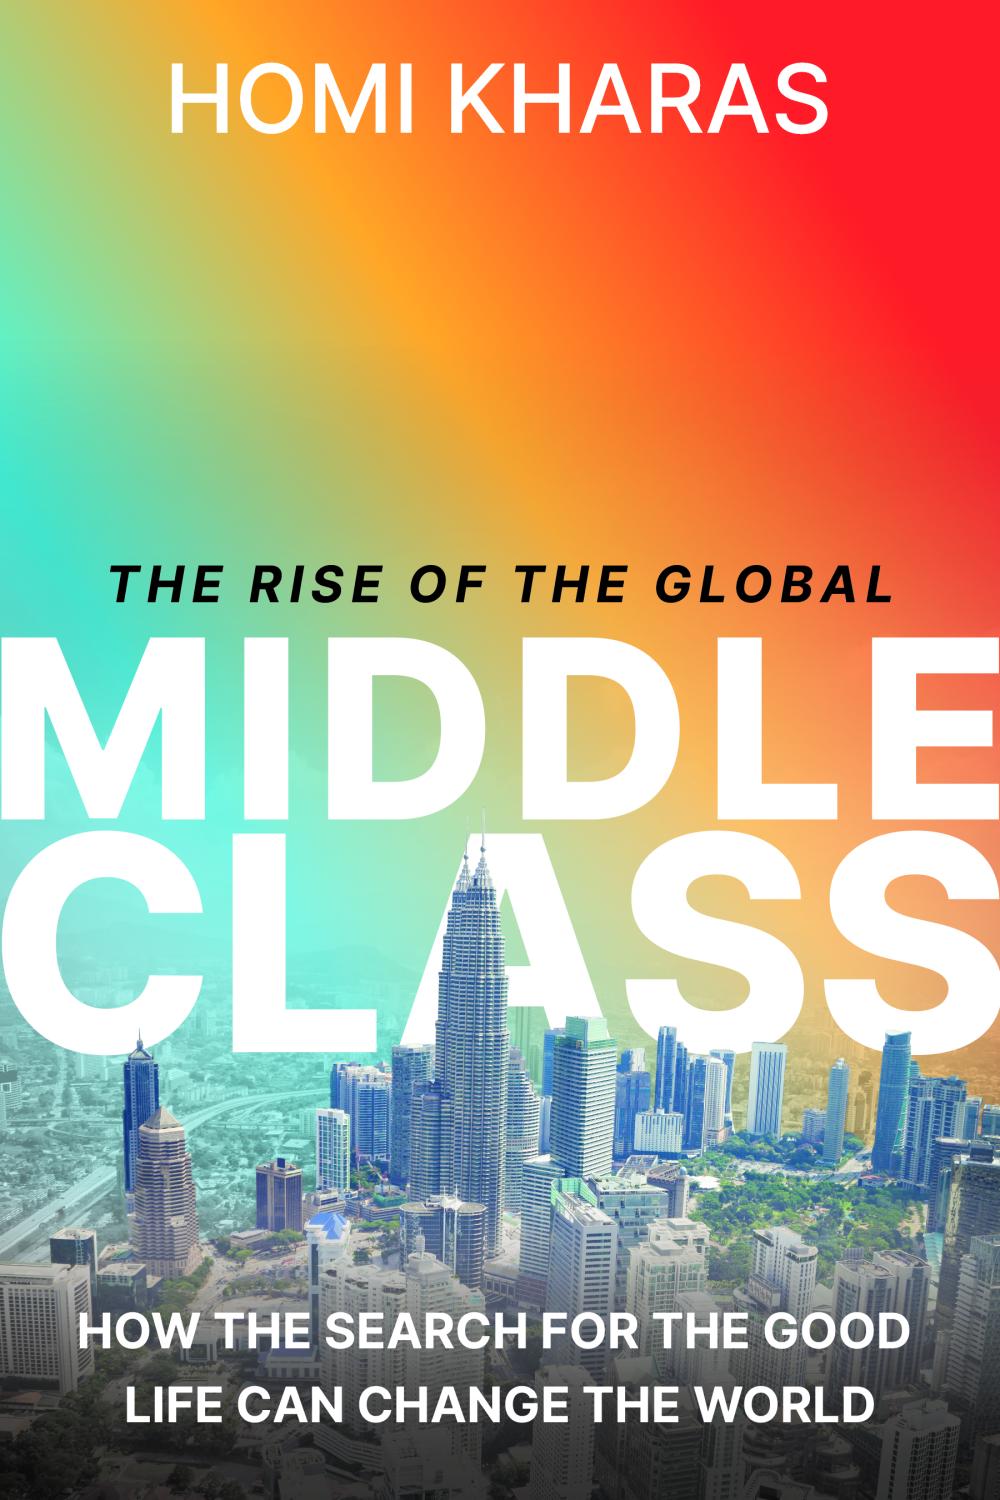 https://www.brookings.edu/wp-content/uploads/2023/11/The-Rise-of-the-Global-Middle-Class.jpg?quality=75&w=1000